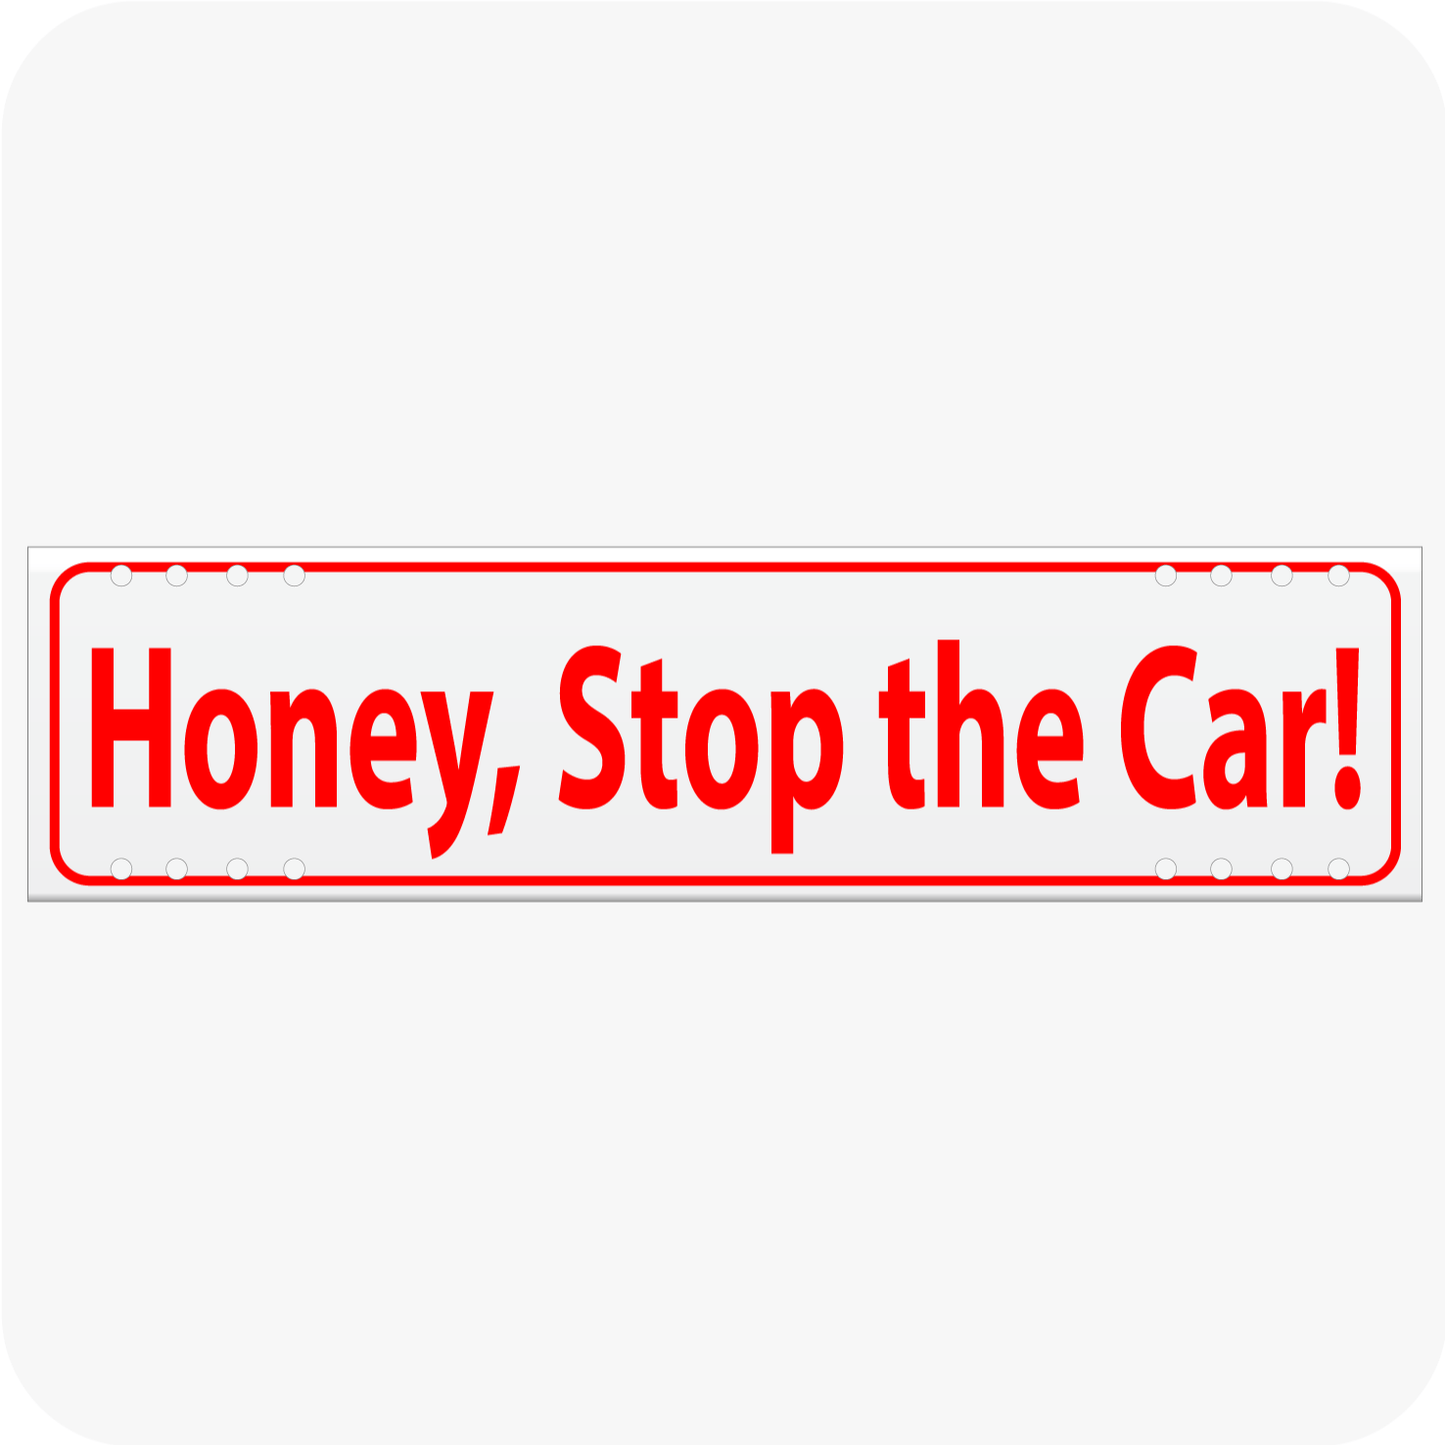 Honey, Stop the Car! 6 x 24 Corrugated Rider - Red